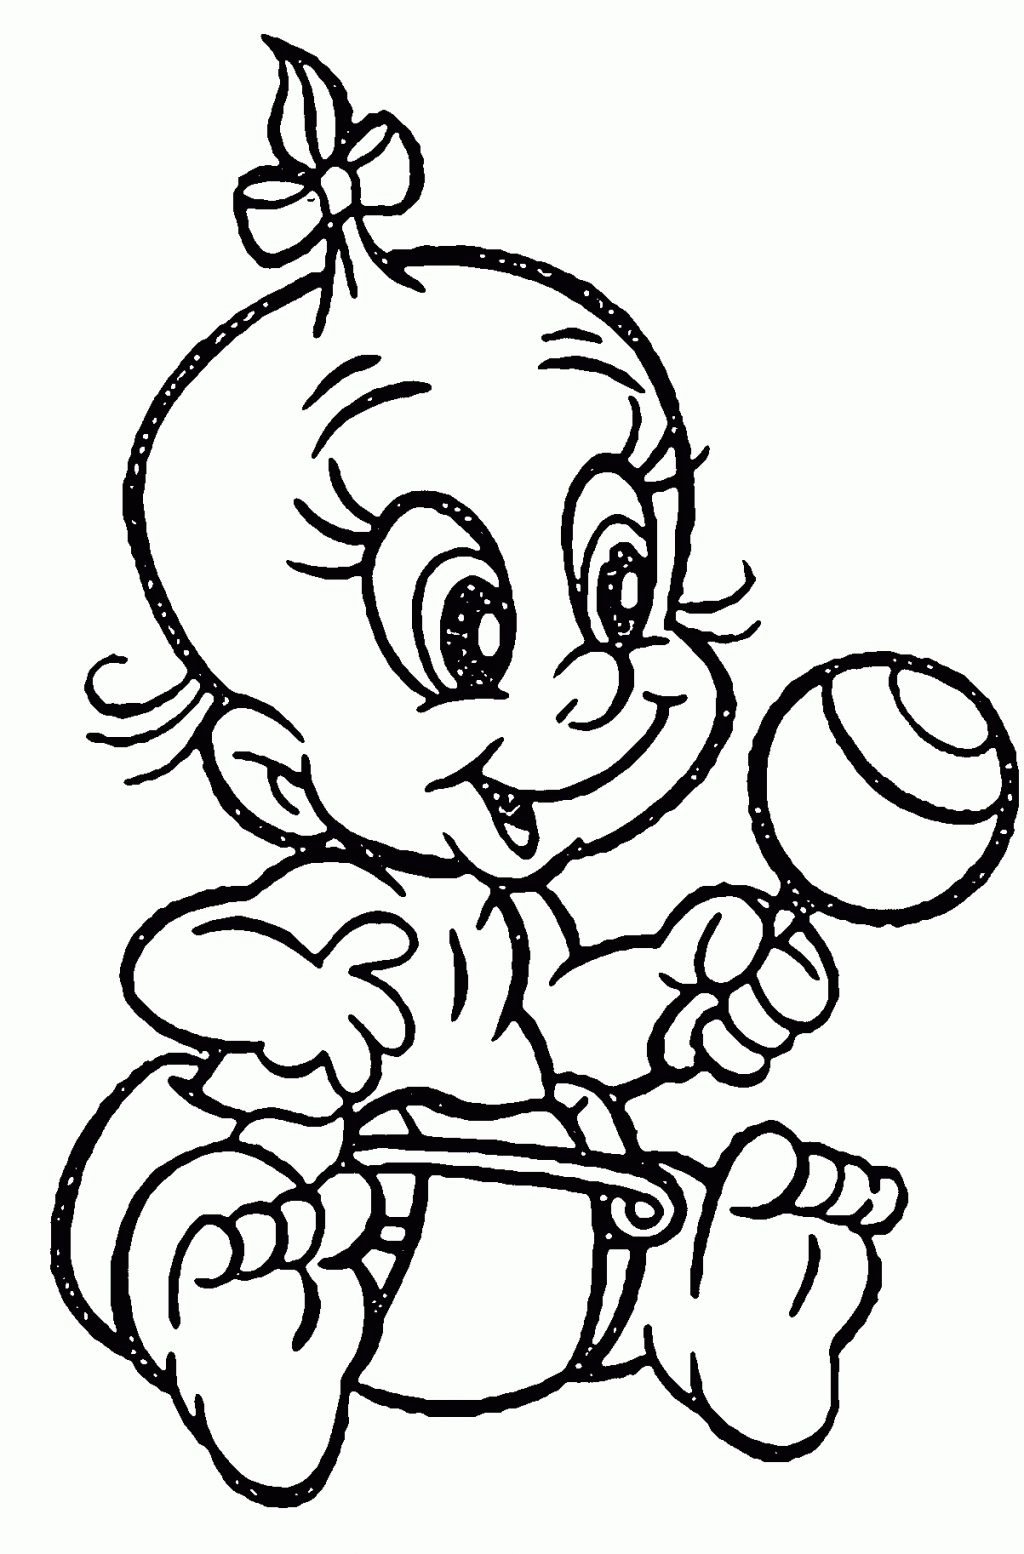 Coloring Pages : Baby Showerg Pages Printable Free Books New Page - Free Printable Baby Shower Coloring Pages